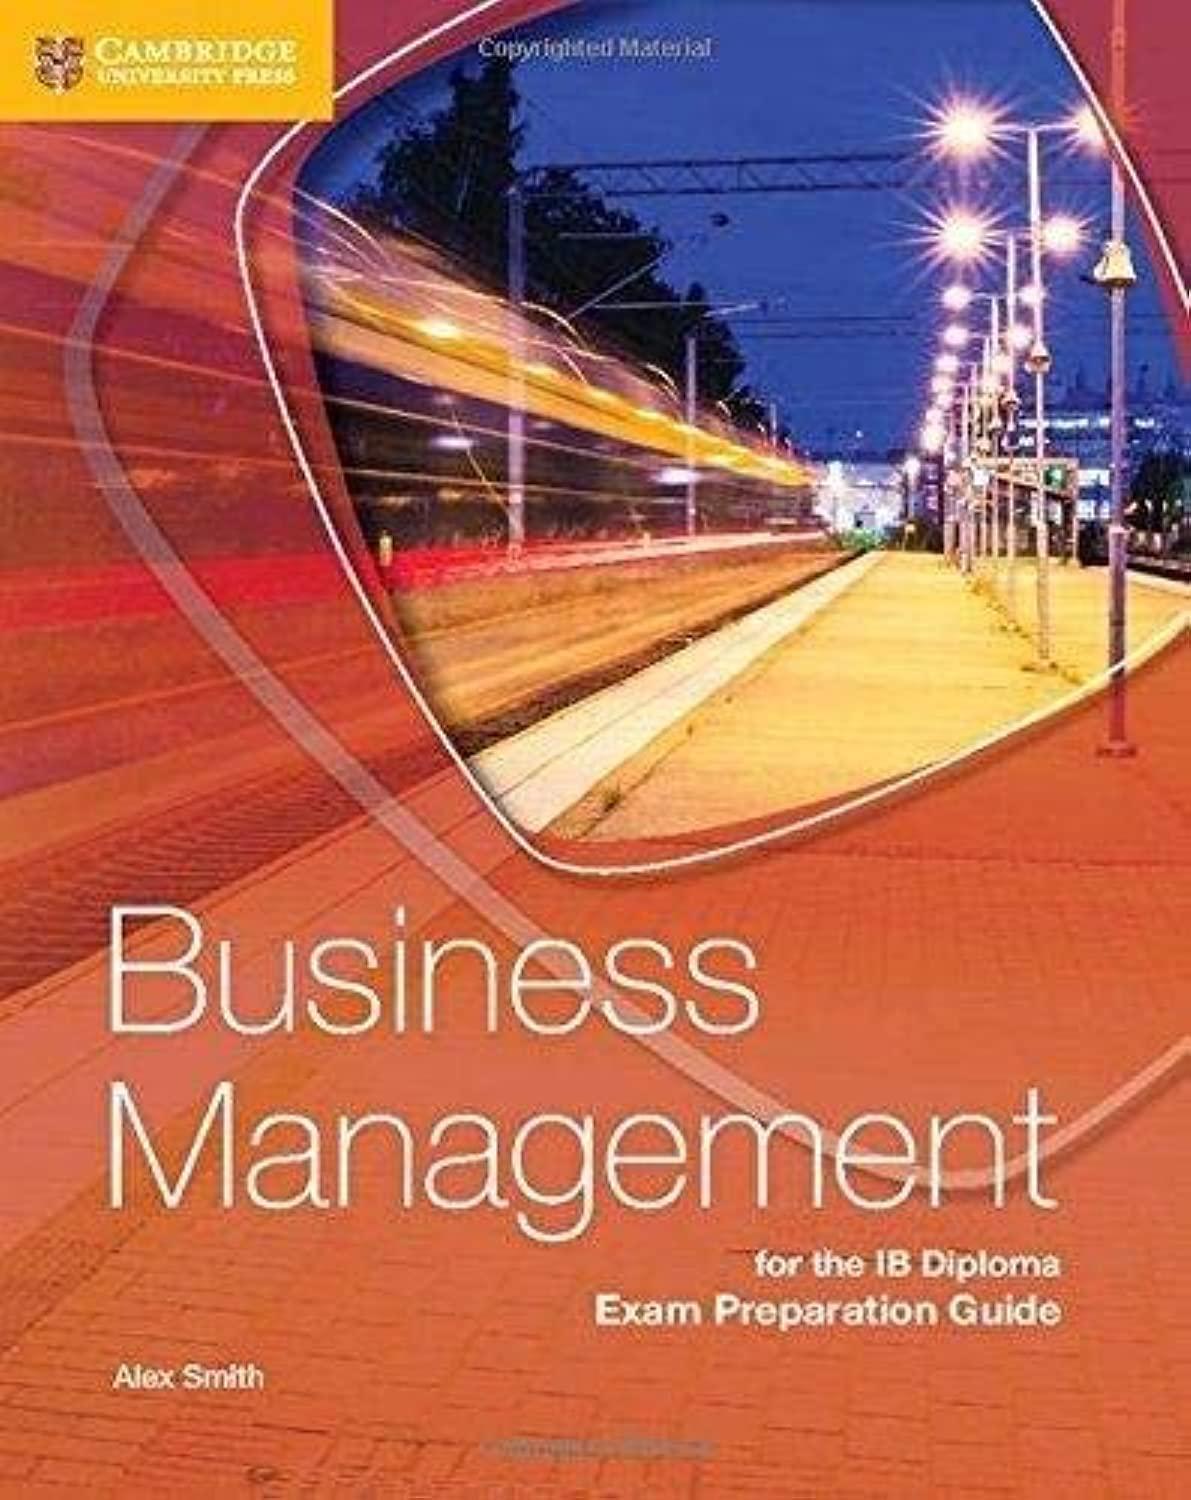 business management for the ib diploma exam preparation guide 1st edition alex smith 1316635732,